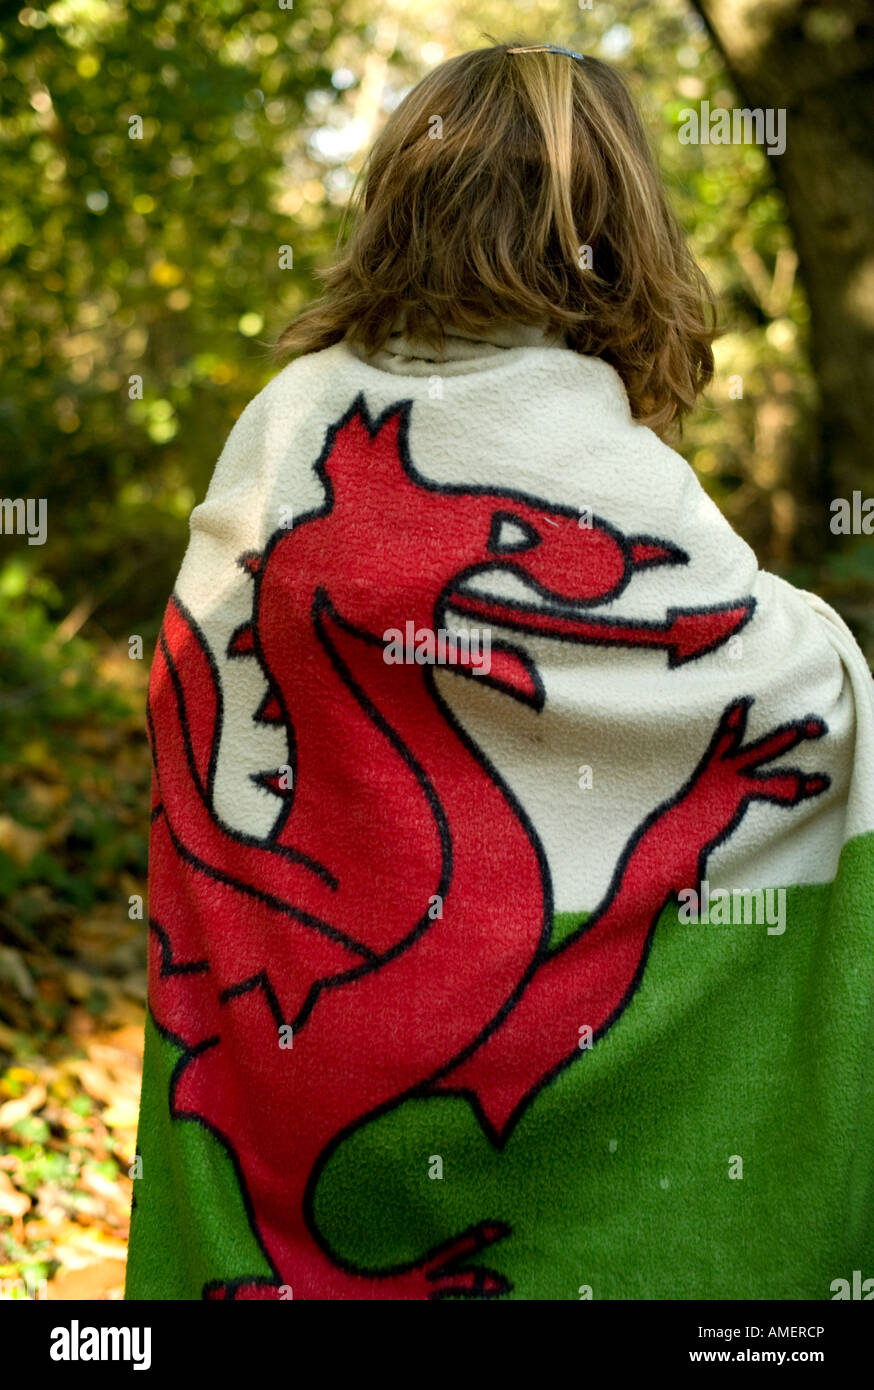 young girl wrapped in welsh flag (red dragon national emblem of wales) walking in a forest Stock Photo